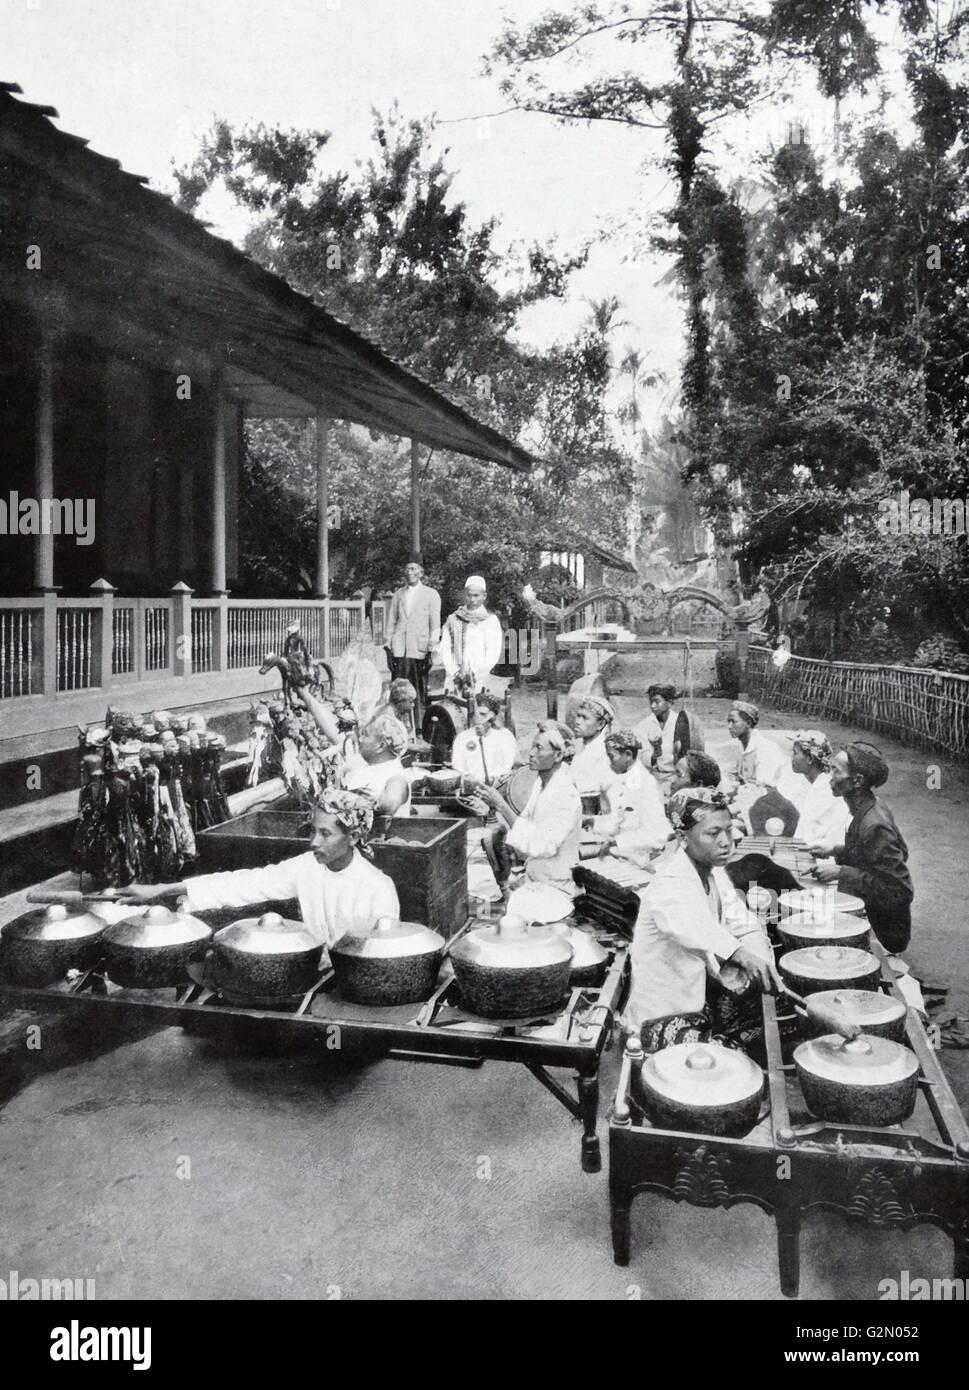 Photograph shows Indonesian Wayang-puppets and gamelan (Sundanese orchestra) sitting outside a village hut rehearsing. Dutch East Indies, known as modern Indonesia. Dated c1935. Stock Photo